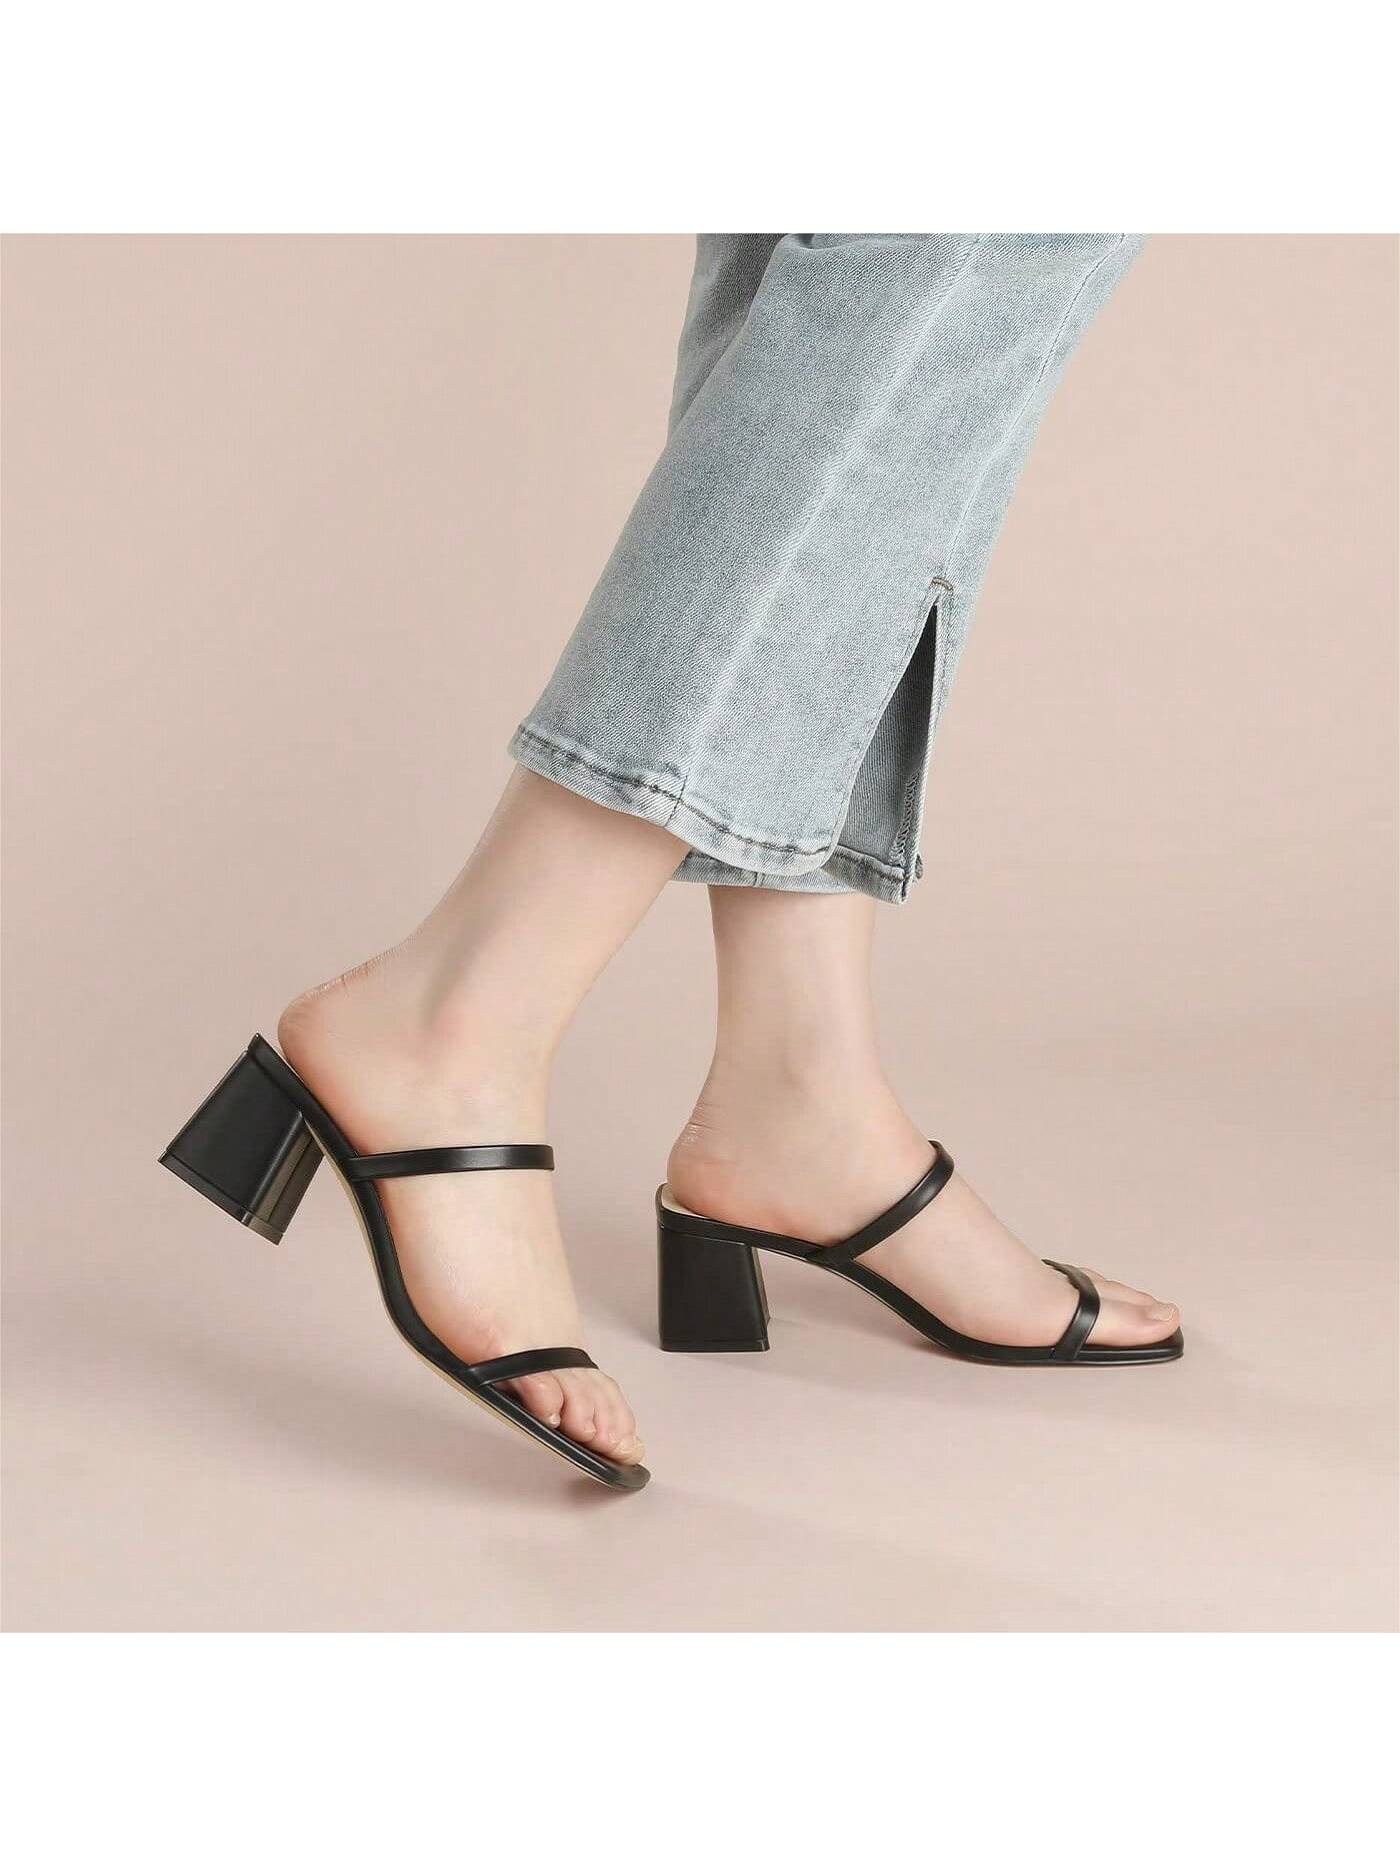 2.25IN Open Toe Ankle Strap Chunky Heels - Slip On Heeled Sandal Mule- Nude Black Strappy Heels For Party Wedding Dress Shoes-BLACK PU-2